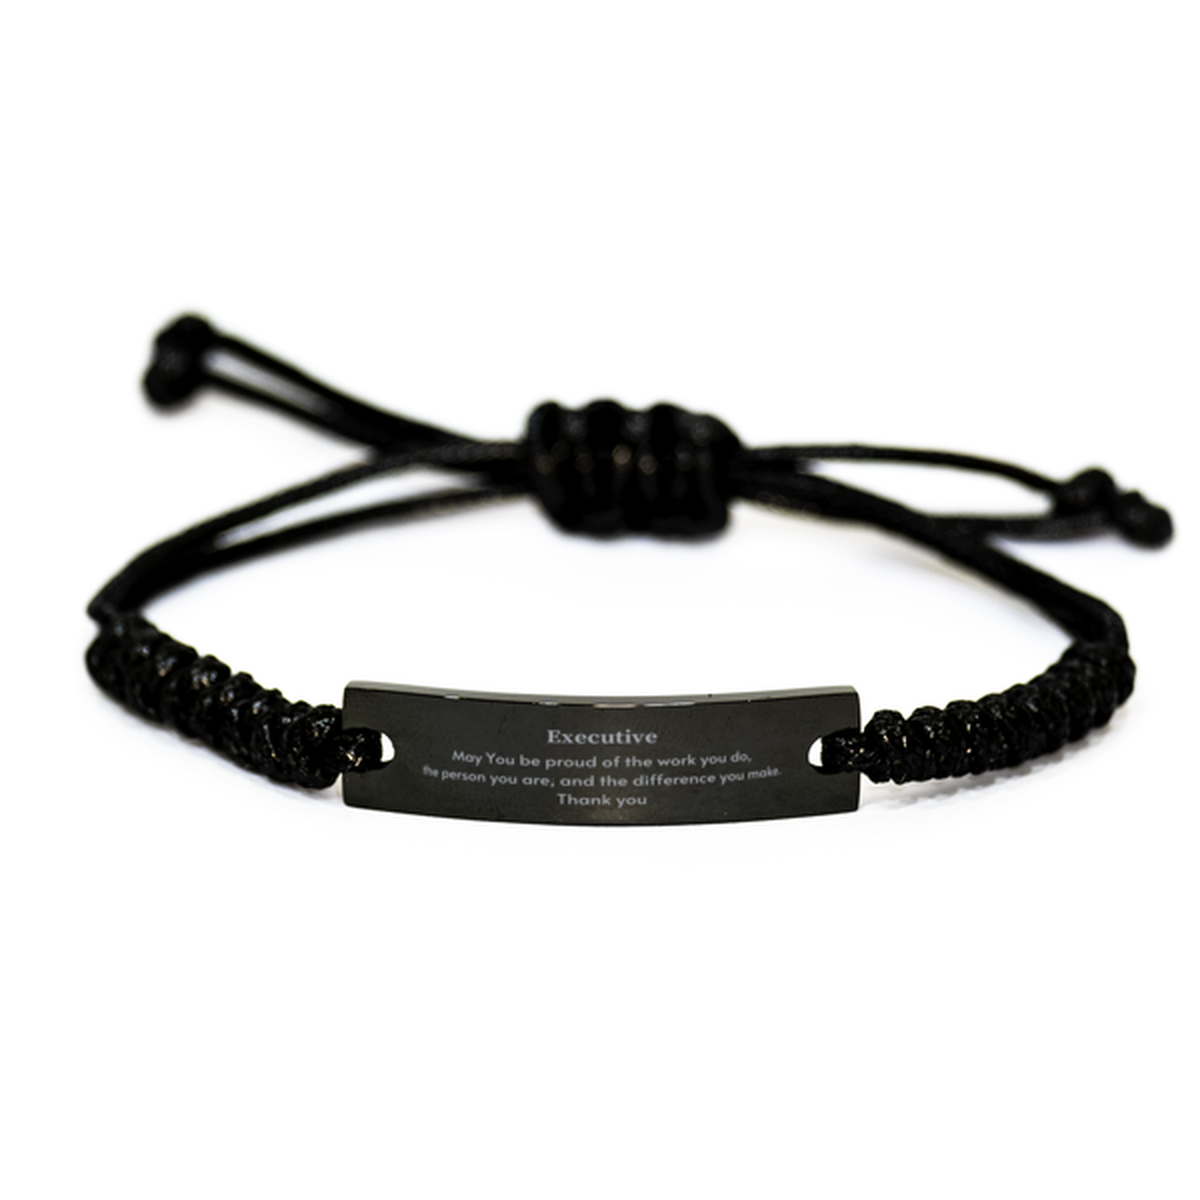 Heartwarming Black Rope Bracelet Retirement Coworkers Gifts for Executive, Executive May You be proud of the work you do, the person you are Gifts for Boss Men Women Friends